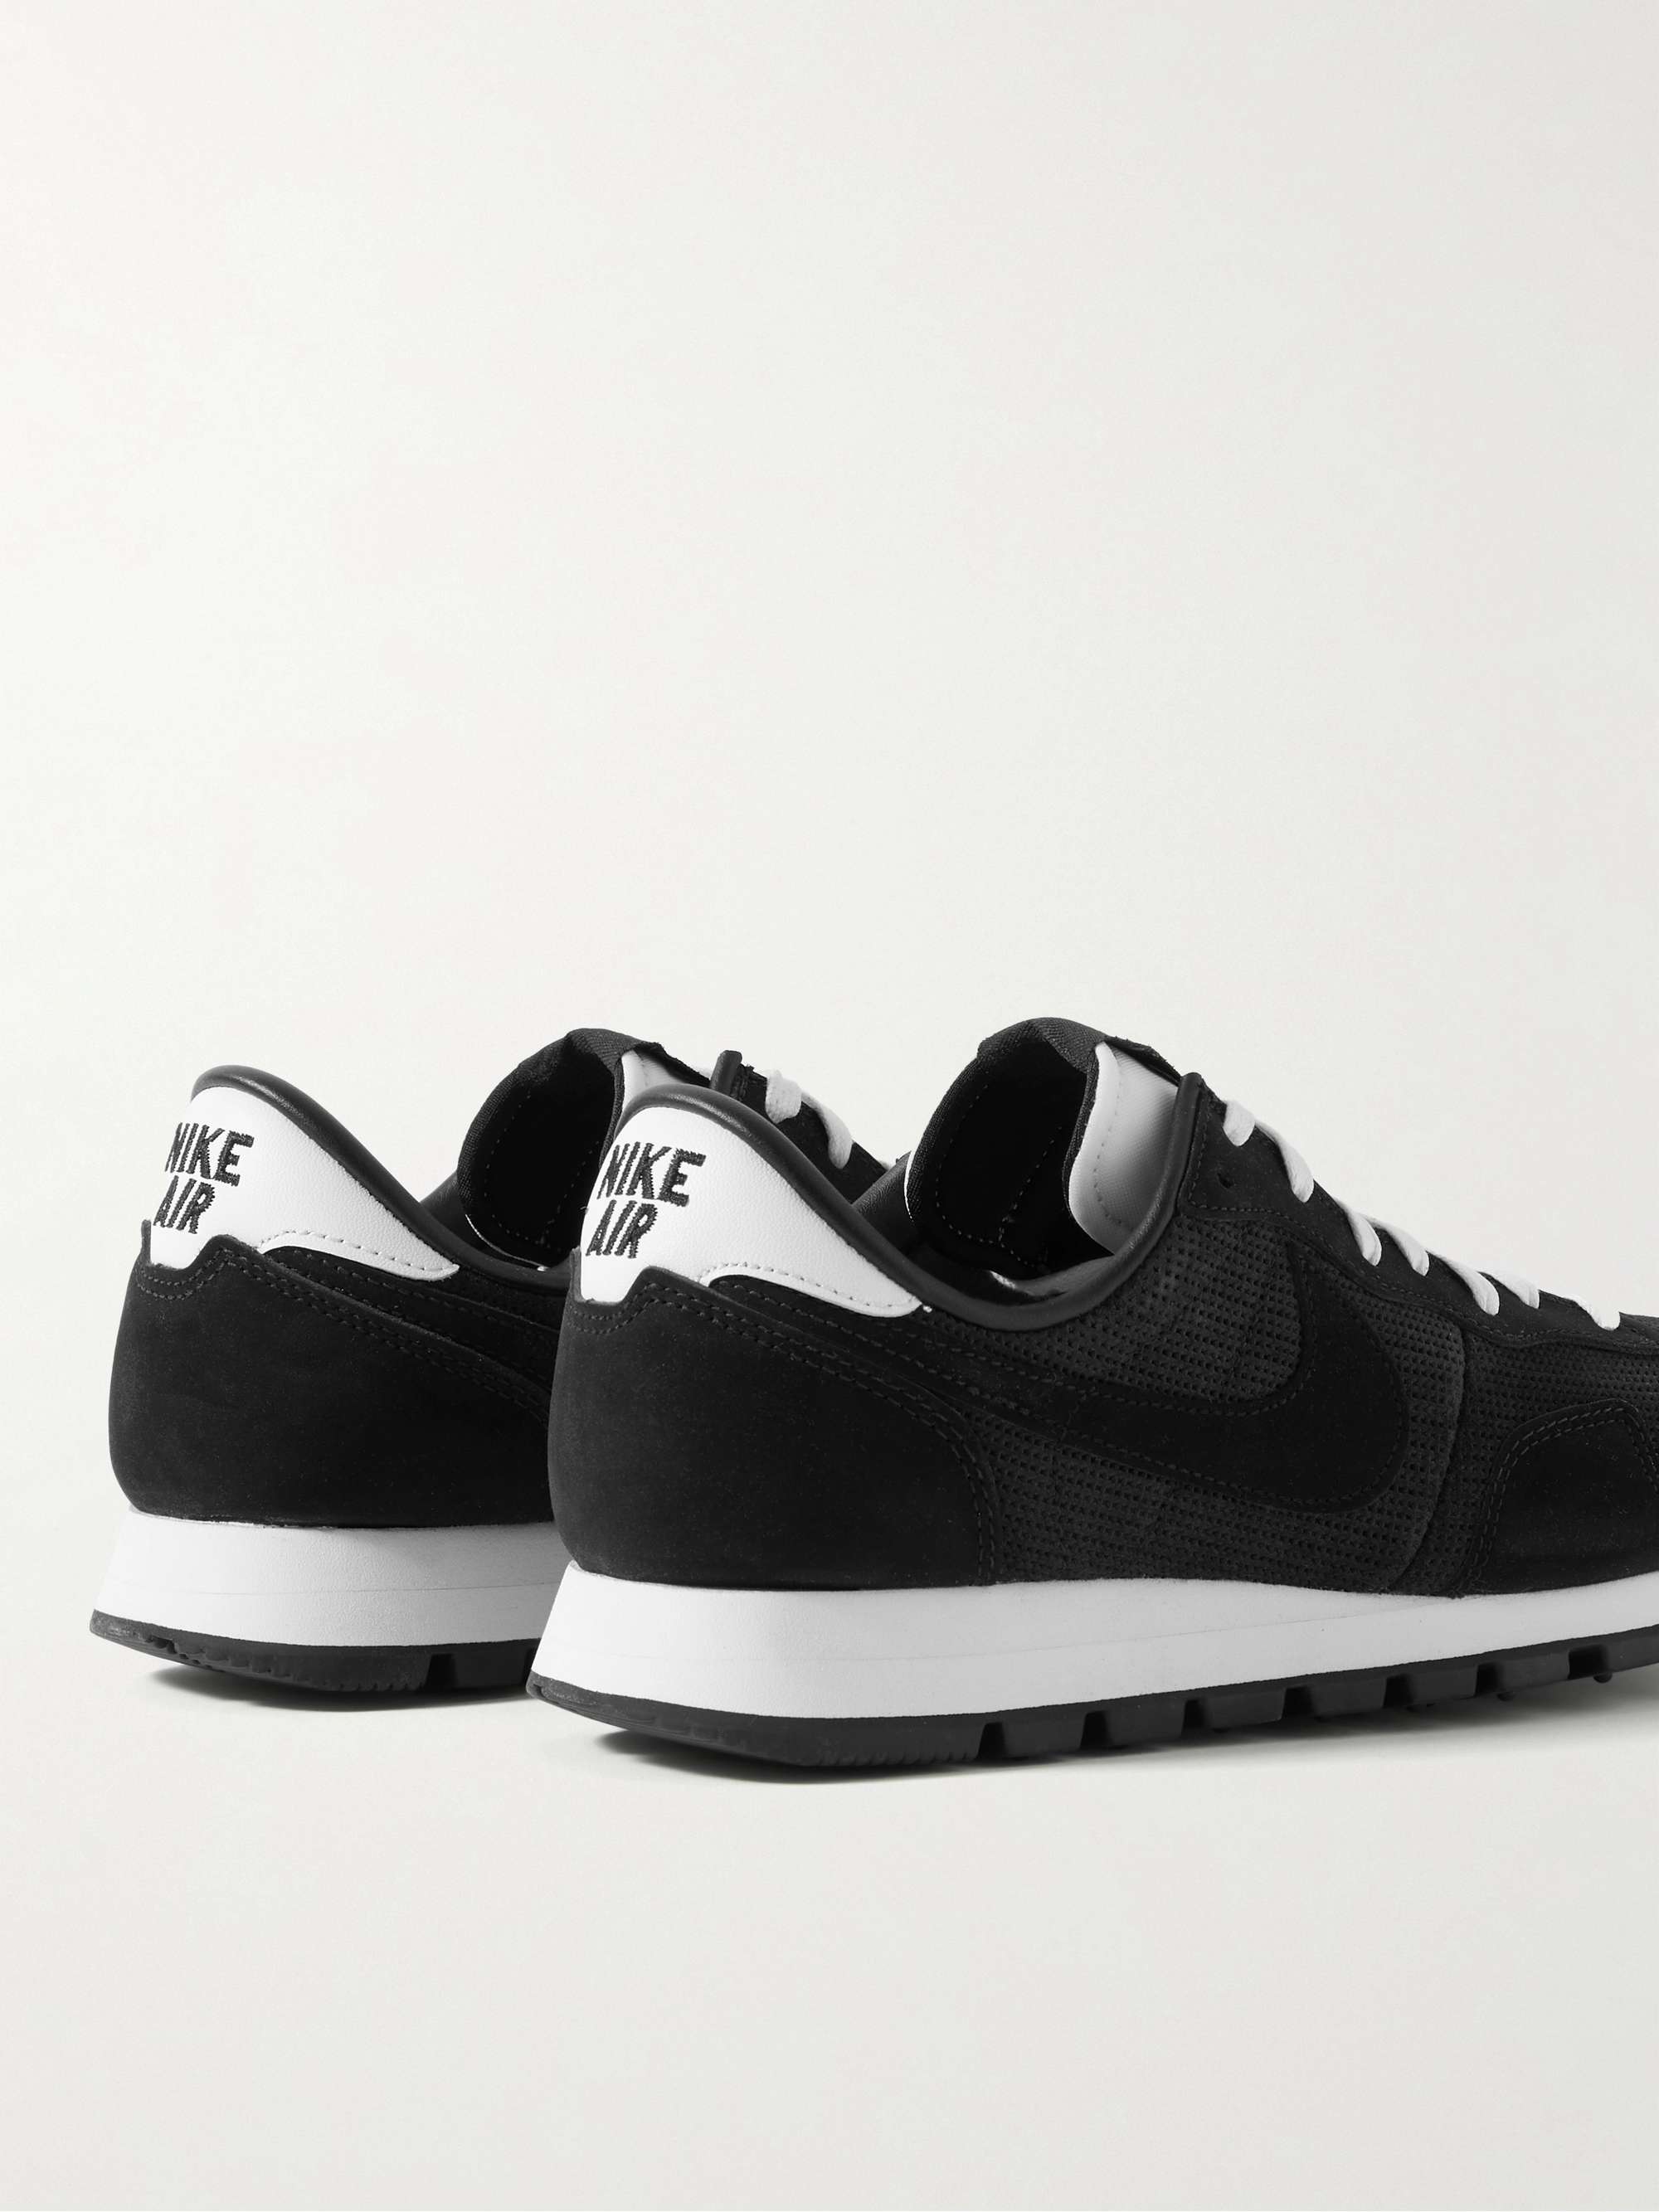 NIKE Air Pegasus 83 Leather-Trimmed Perforated Suede Sneakers